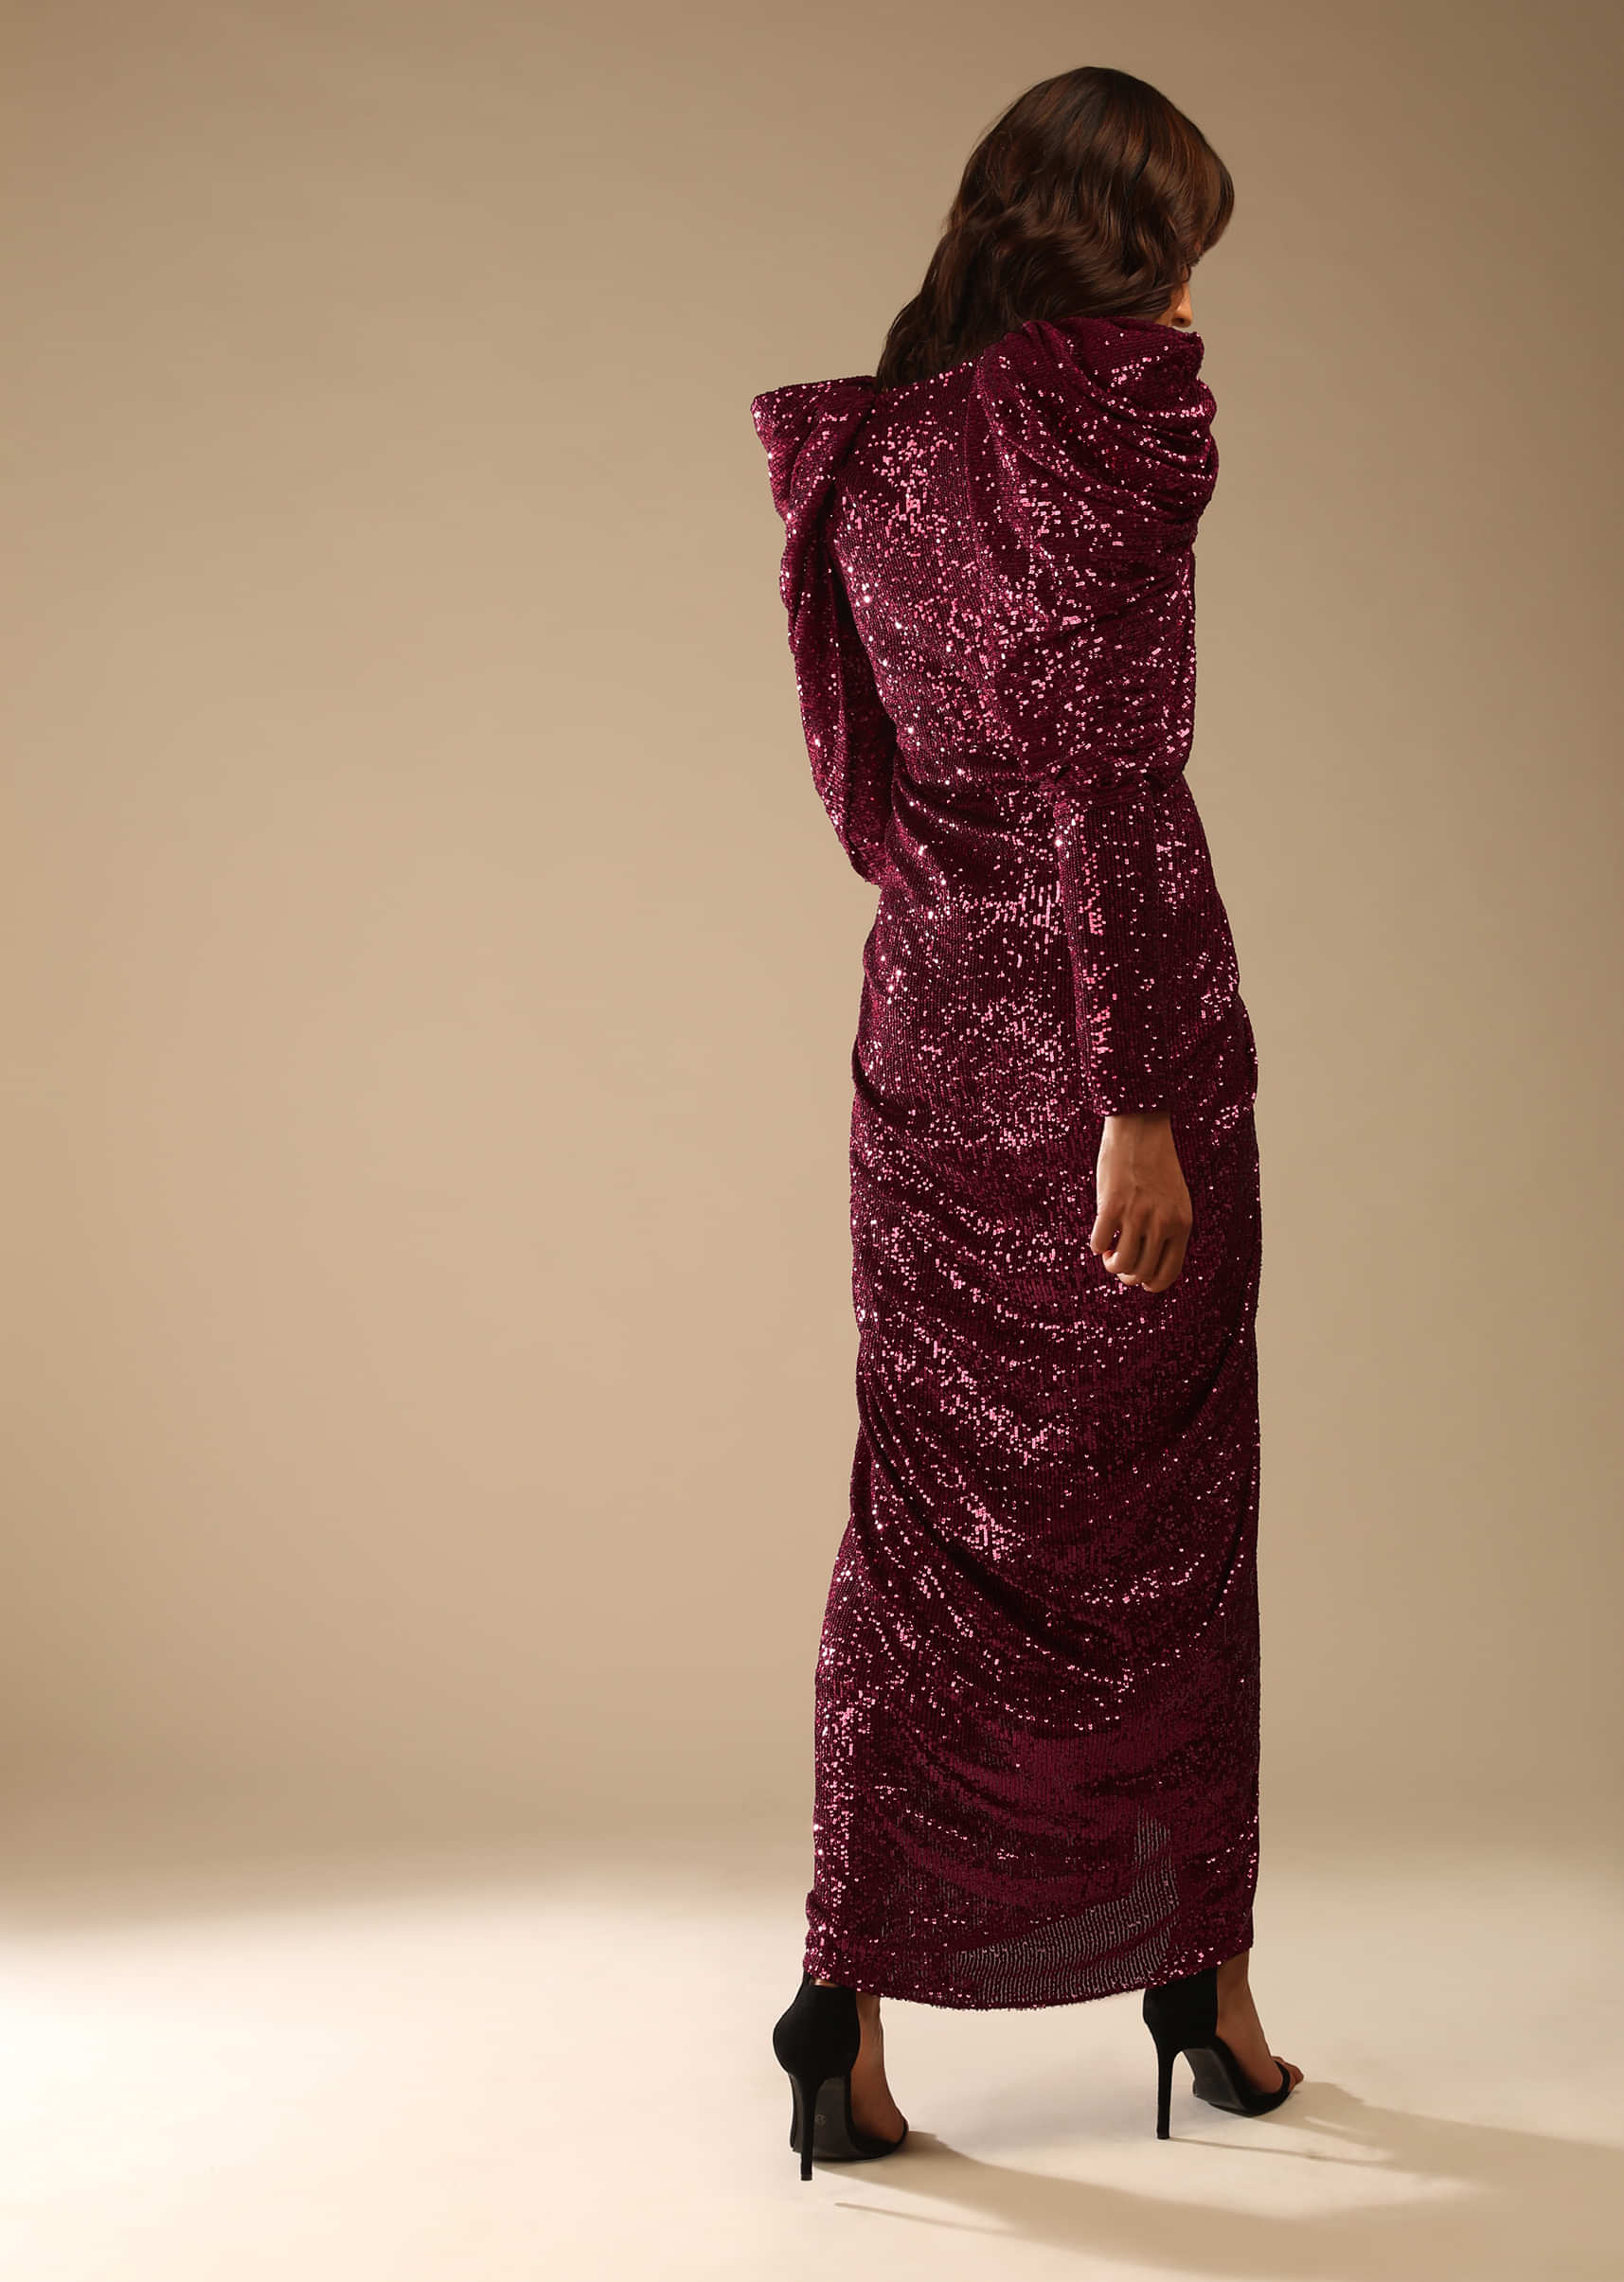 Burgundy Red Gown Embellished In Sequins With Elaborate Puffed Shoulders And Plunging Neckline Online - Kalki Fashion